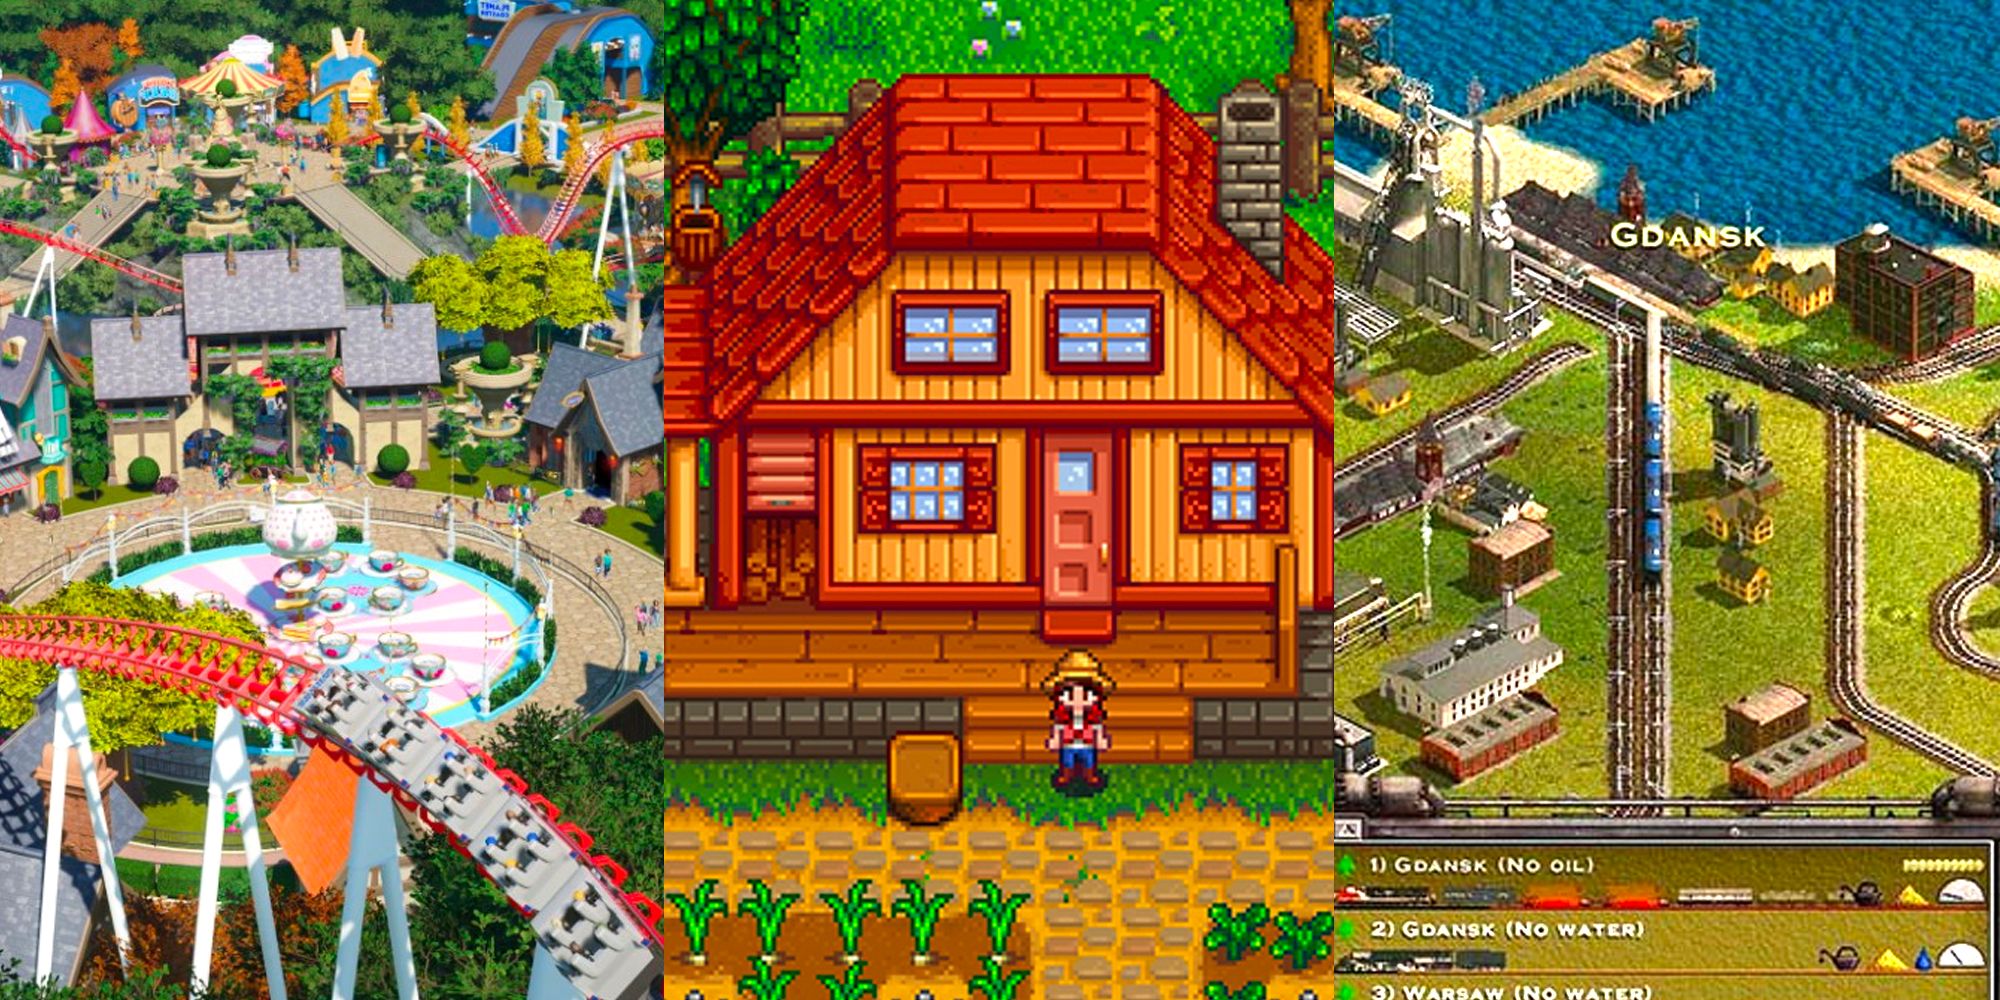 Split image: Gameplay screenshots from Roller Coaster Tycoon, Stardew Valley and Transportation Tycoon.